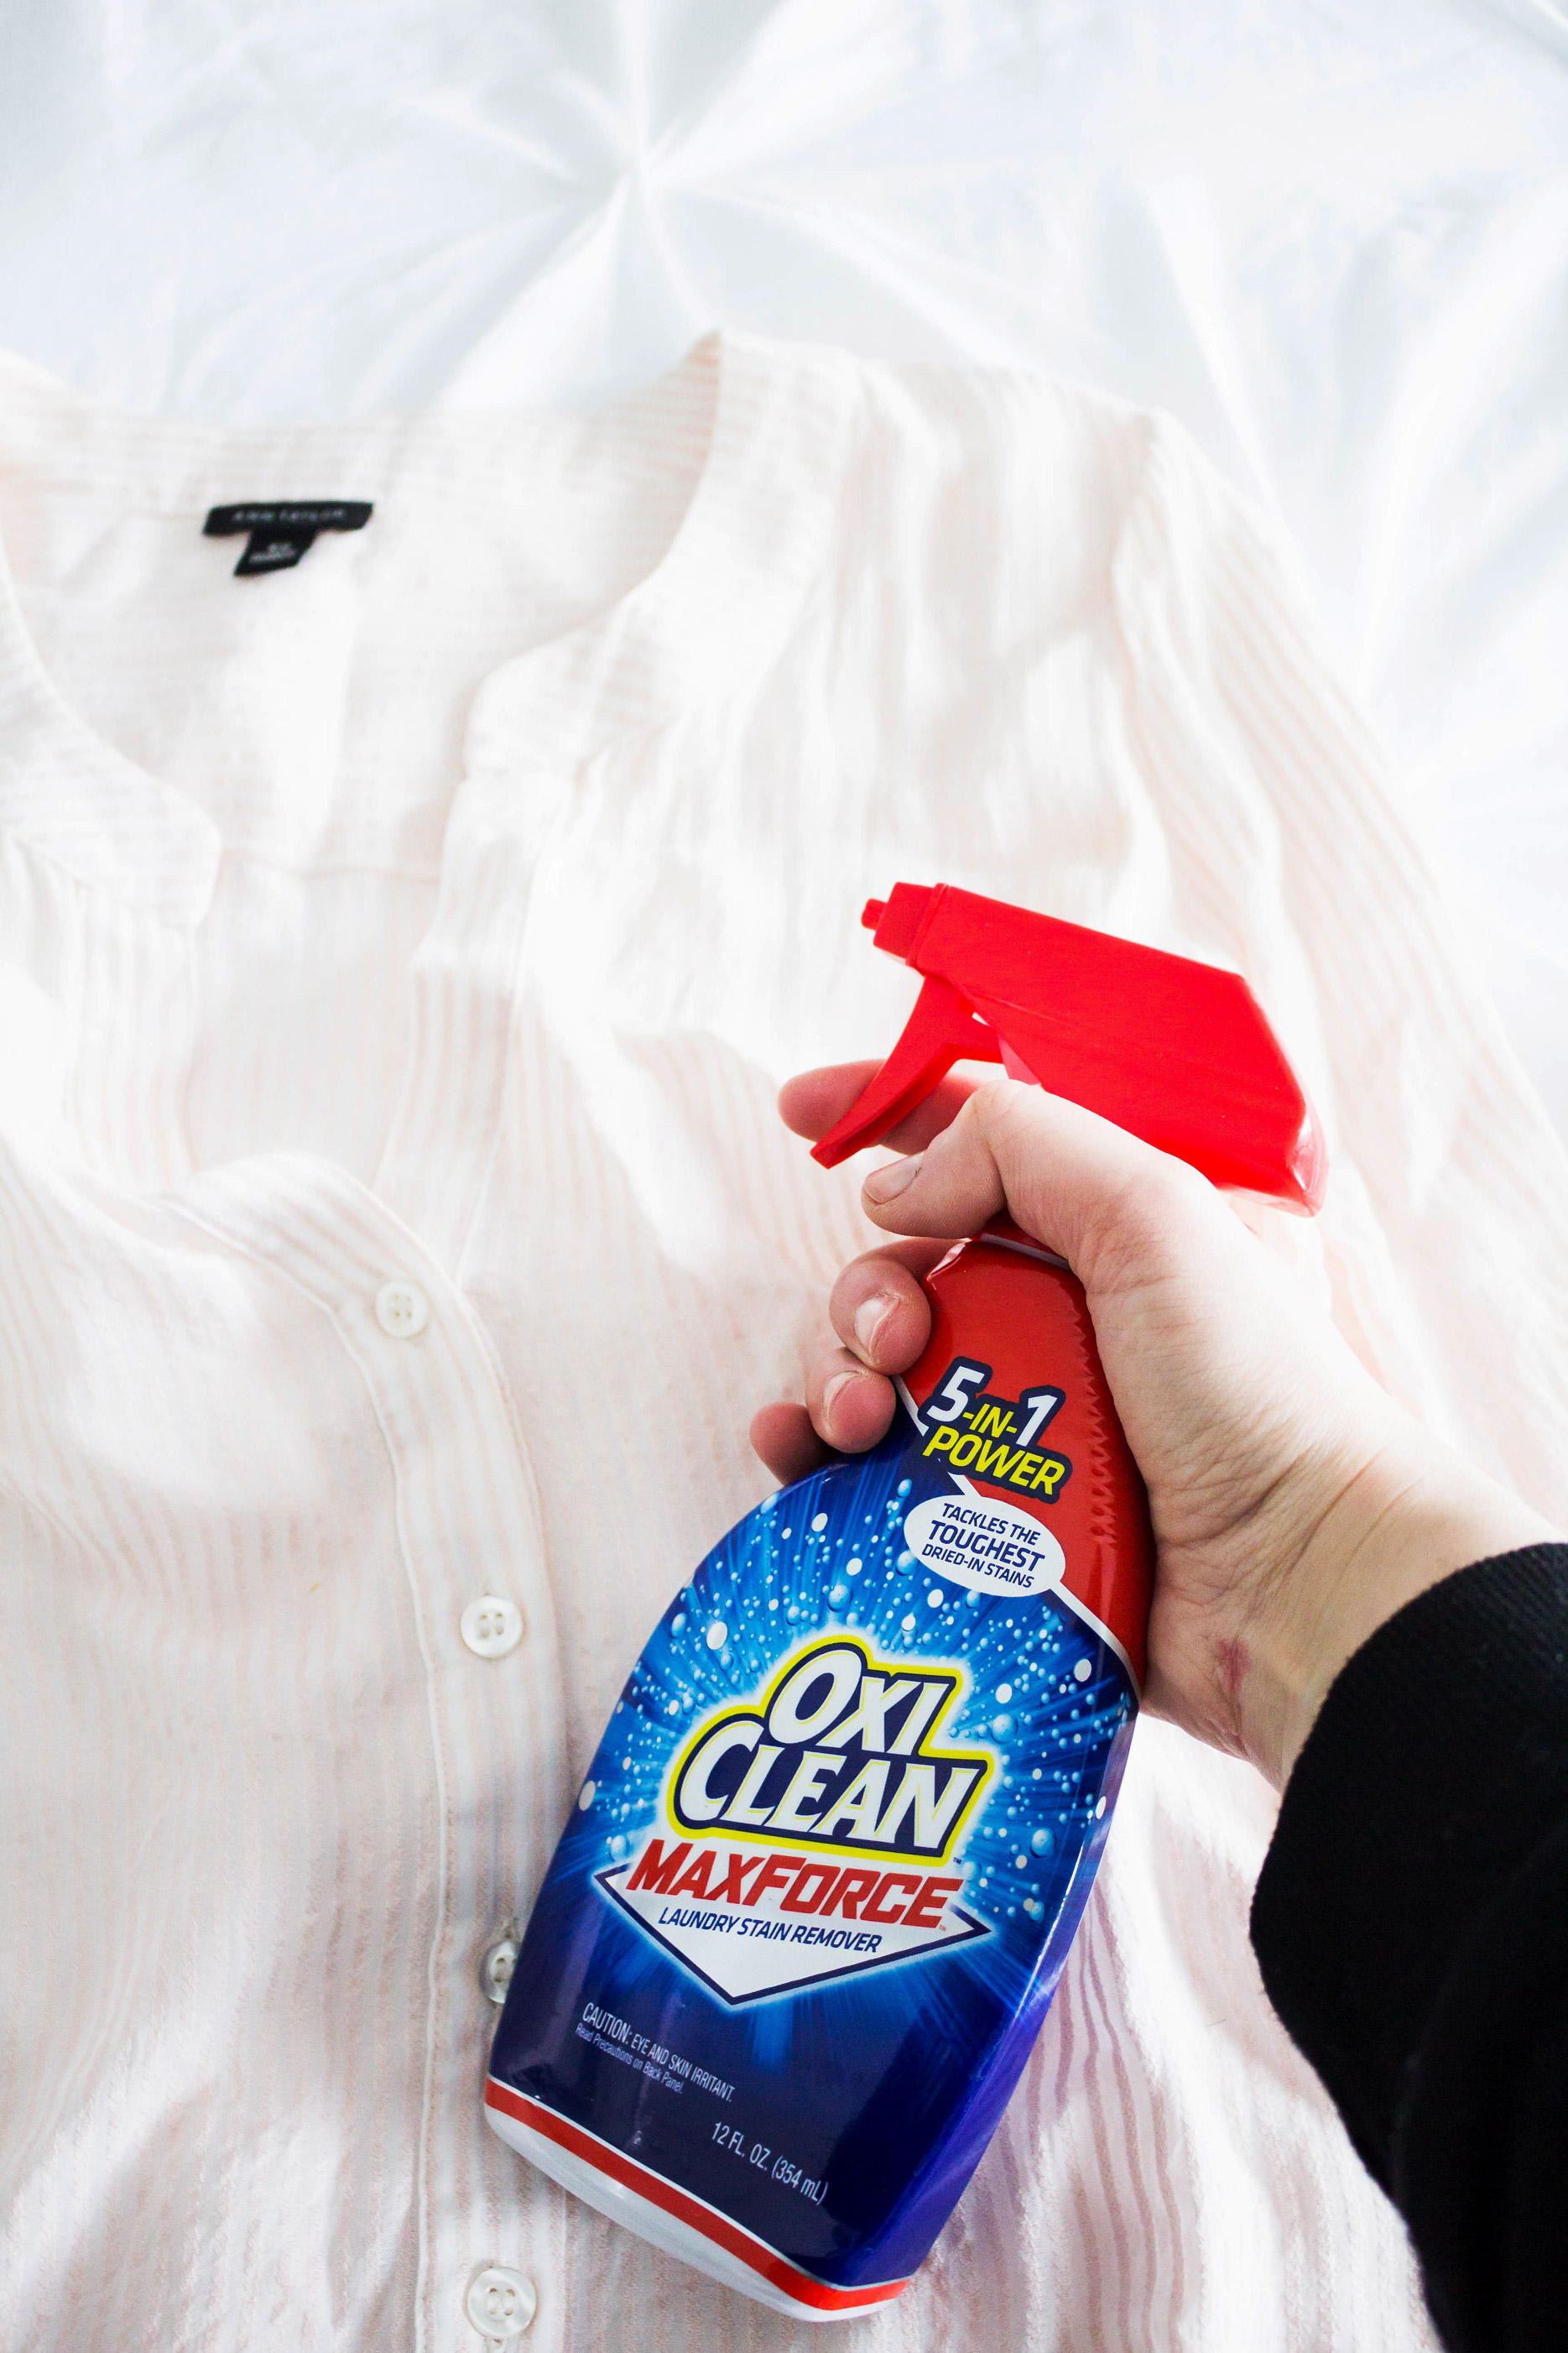 The 3 Best Stain Removers EVER from a Reseller